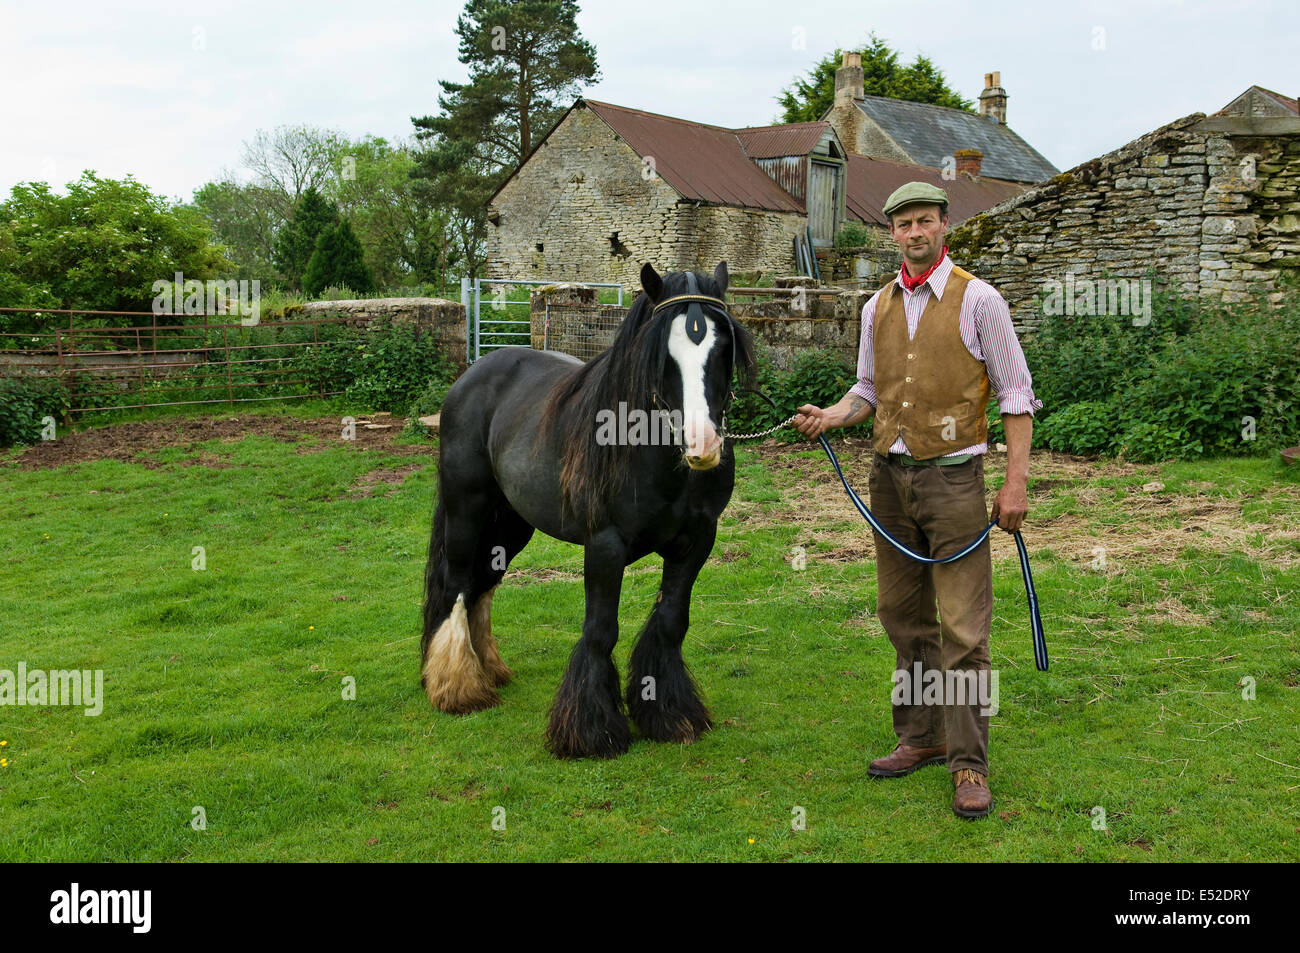 A farm worker holding a horse on a leading rein. Stock Photo